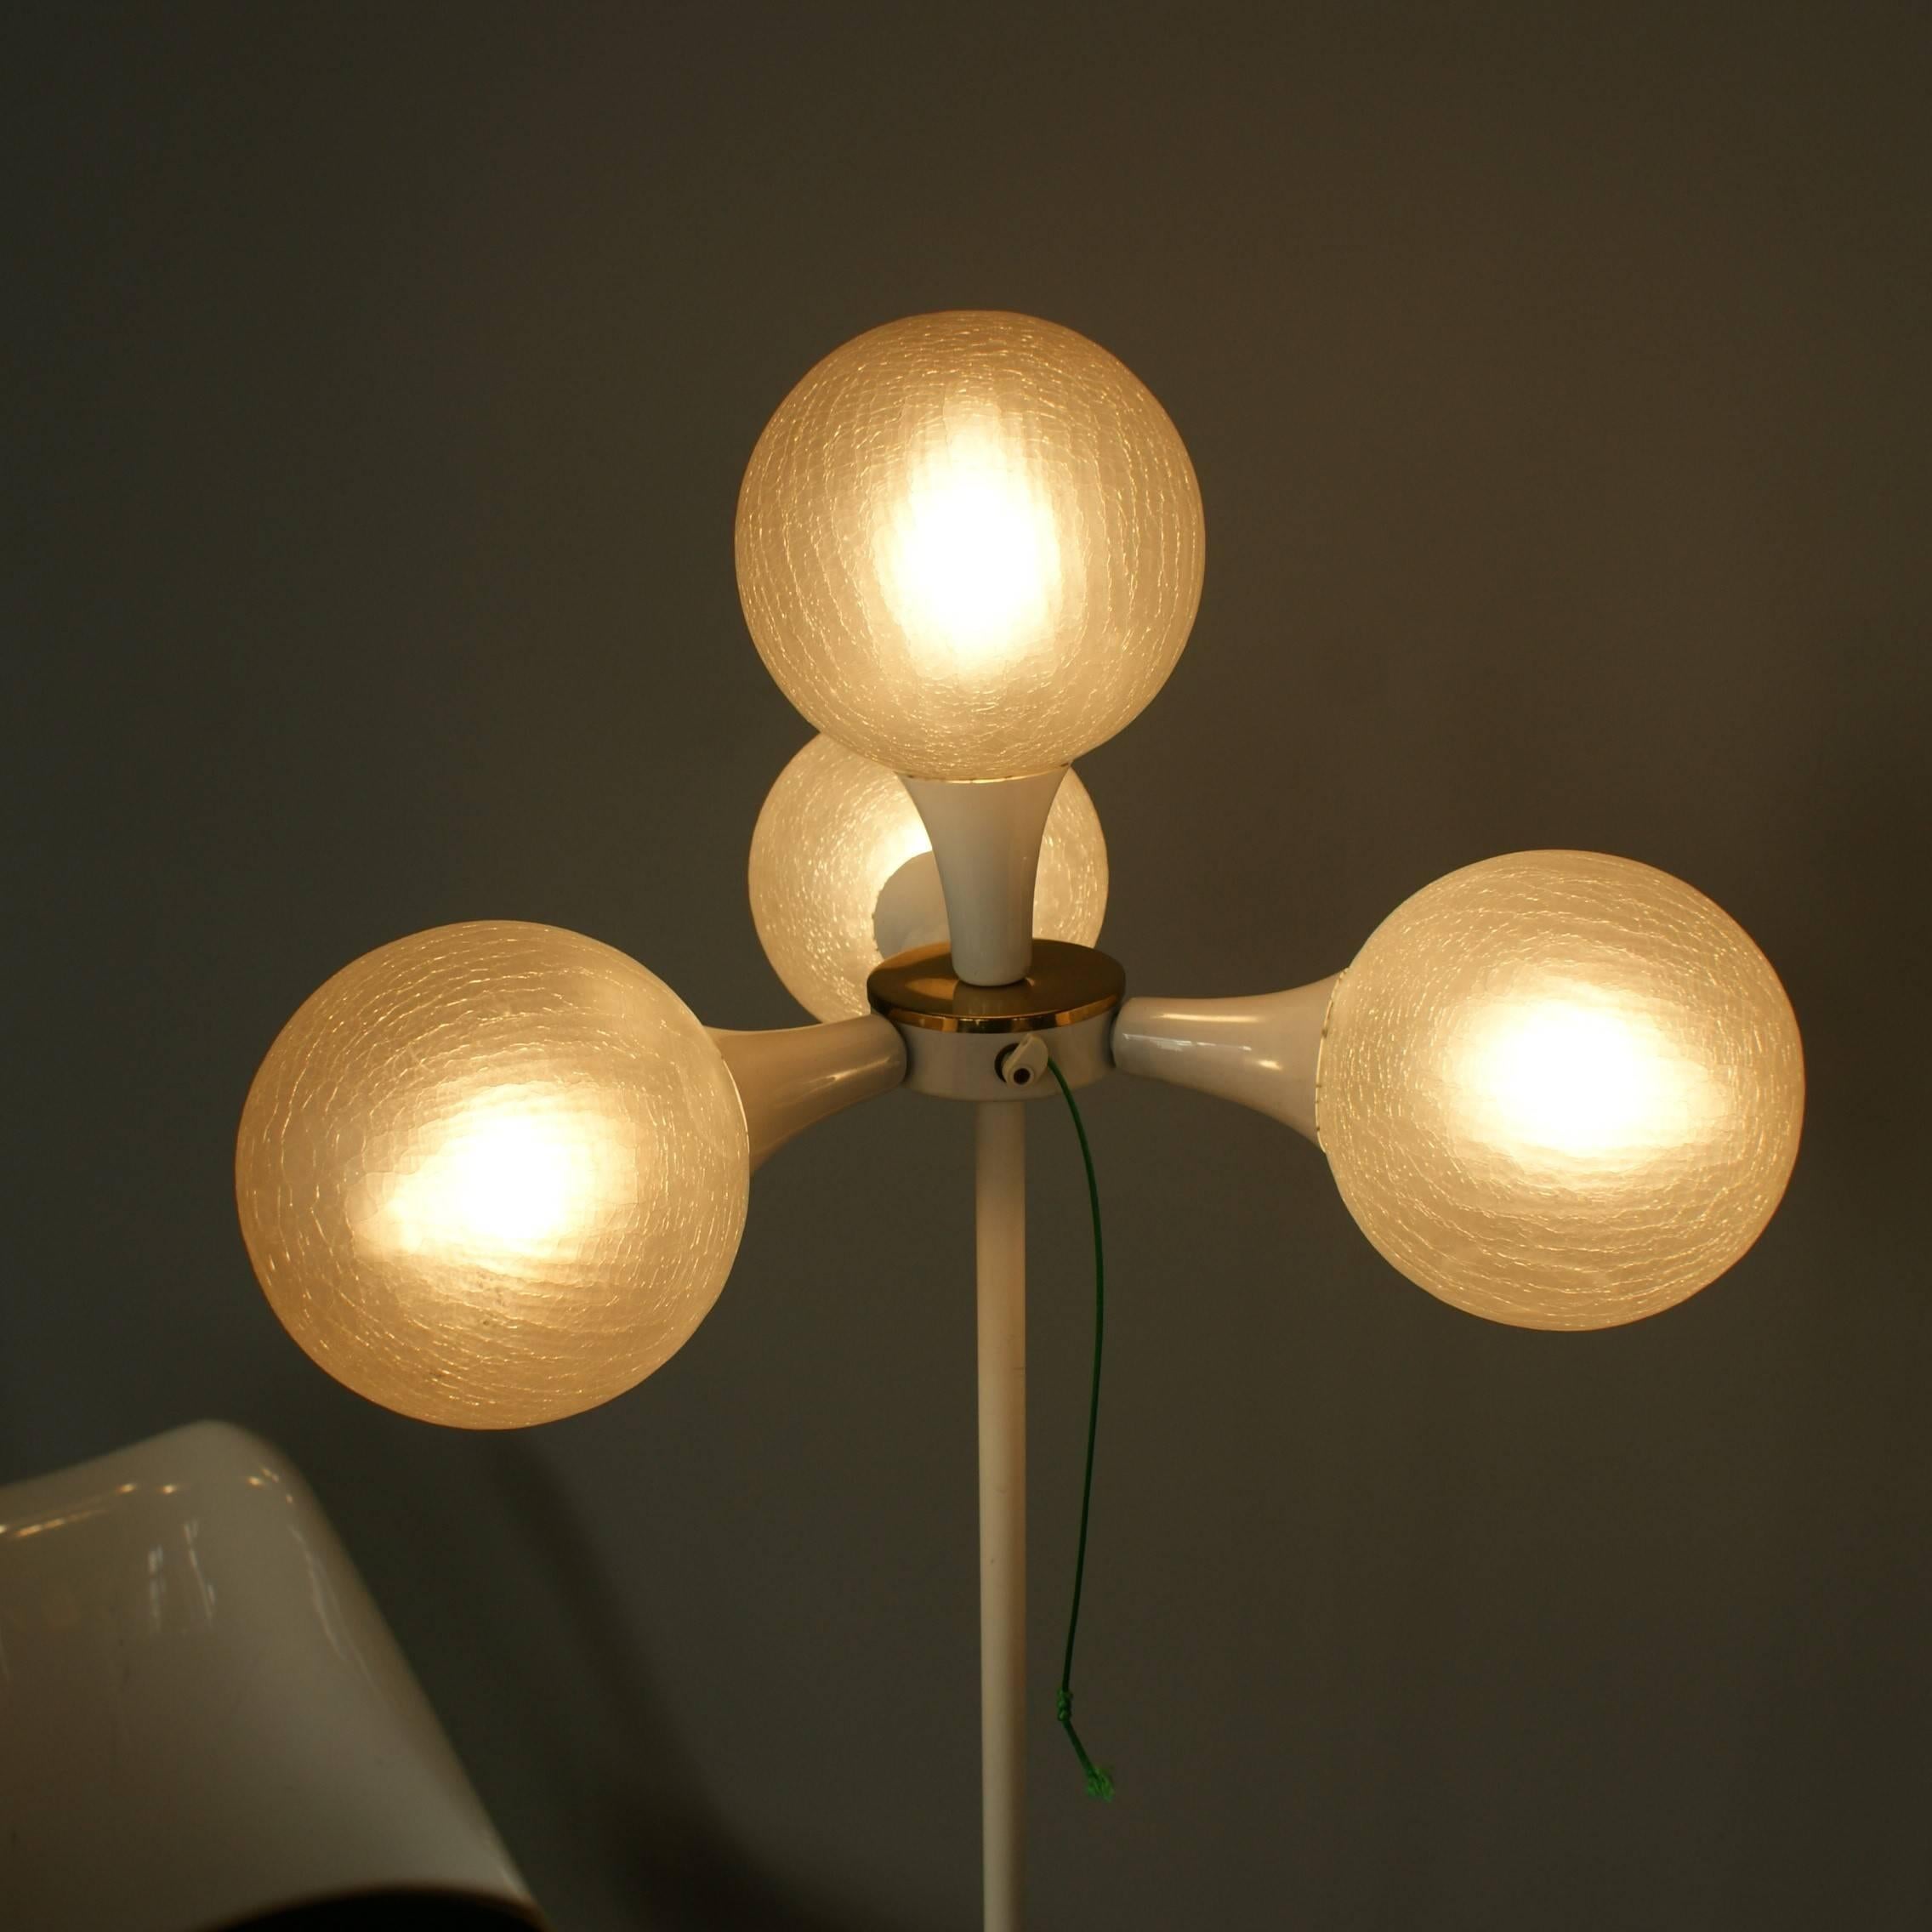 Italian Atomic Floor Lamp with Murano Crackle Glass Globes, 1970s, Italy